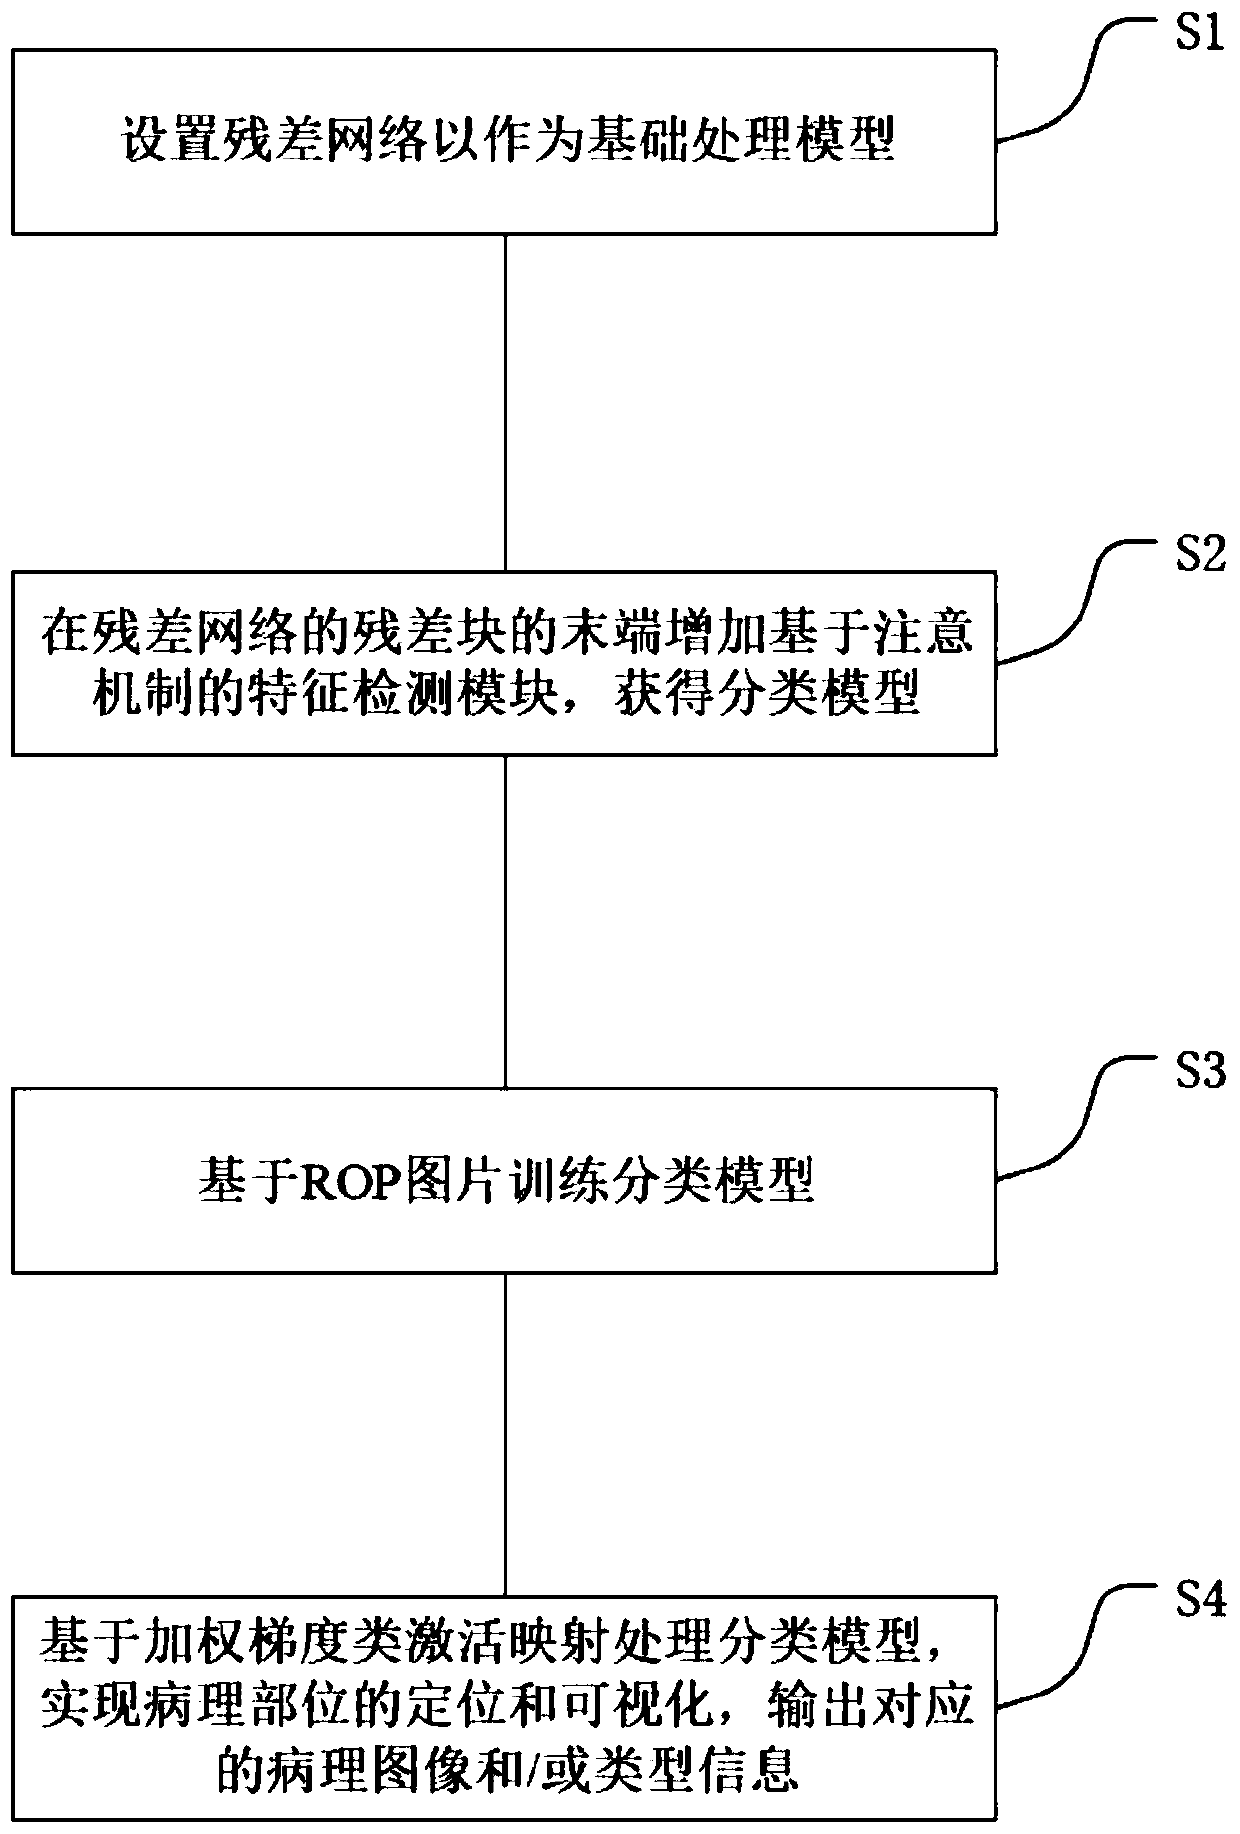 Eye image processing model construction method and device